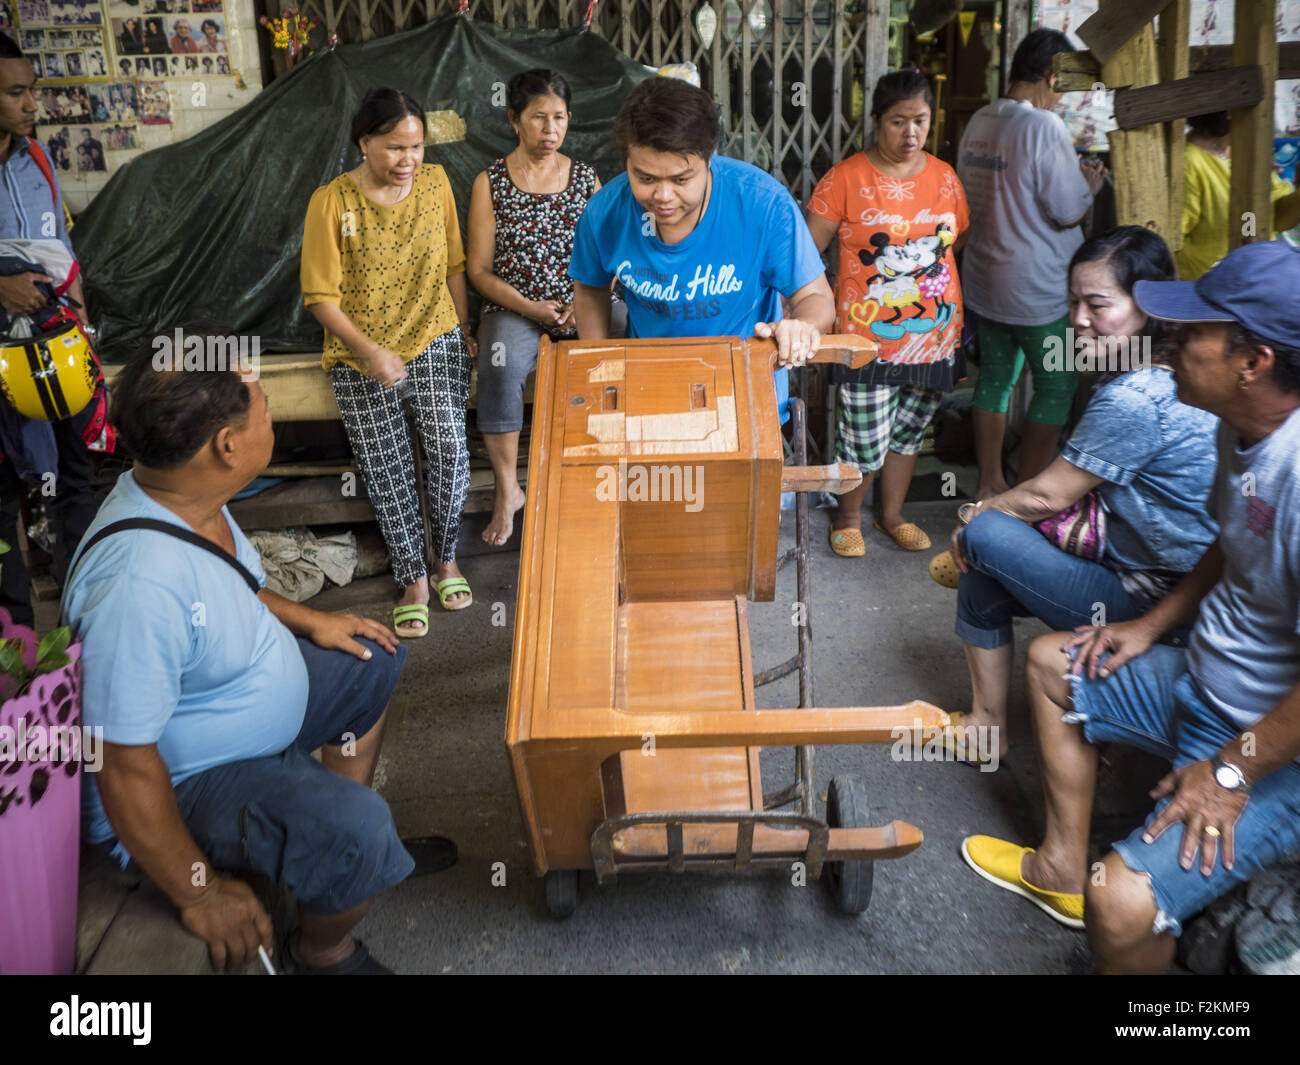 Bangkok, Thailand. 21st Sep, 2015. A neighborhood resident being evicted from his home near Wat Kalayanamit wheels his desk past neighbors while he packs. Fiftyfour homes around Wat Kalayanamit, a historic Buddhist temple on the Chao Phraya River in the Thonburi section of Bangkok are being razed and the residents evicted to make way for new development at the temple. © ZUMA Press, Inc./Alamy Live News Stock Photo